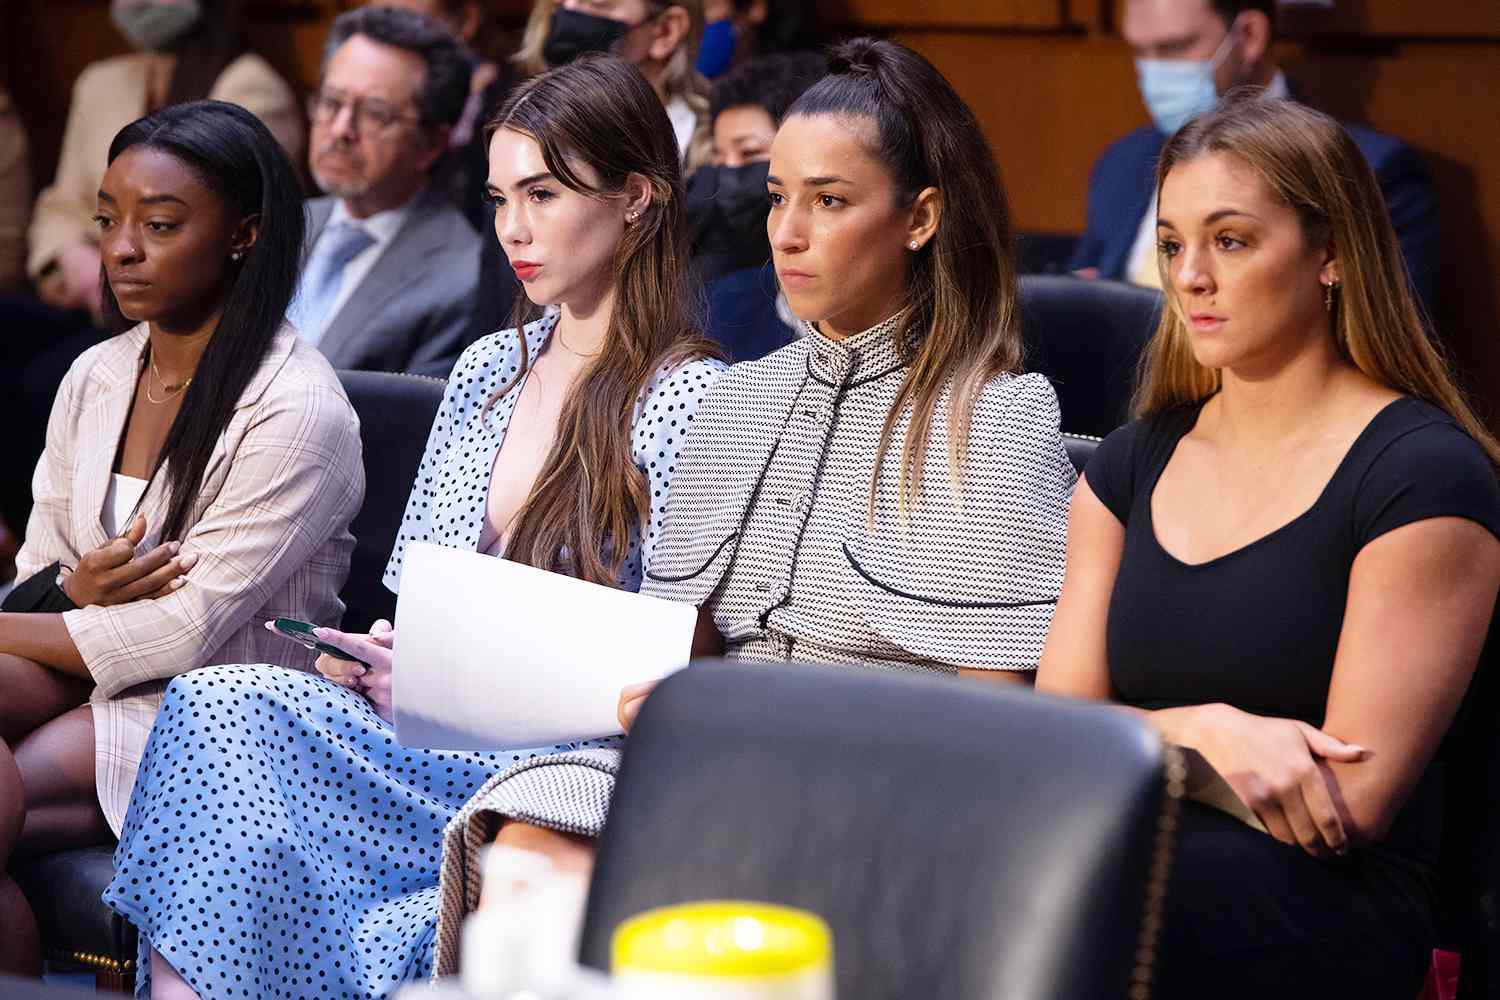 Larry Nassar's Gymnastics Victims to Receive Nearly $139 Million from DOJ for Botched FBI Investigation